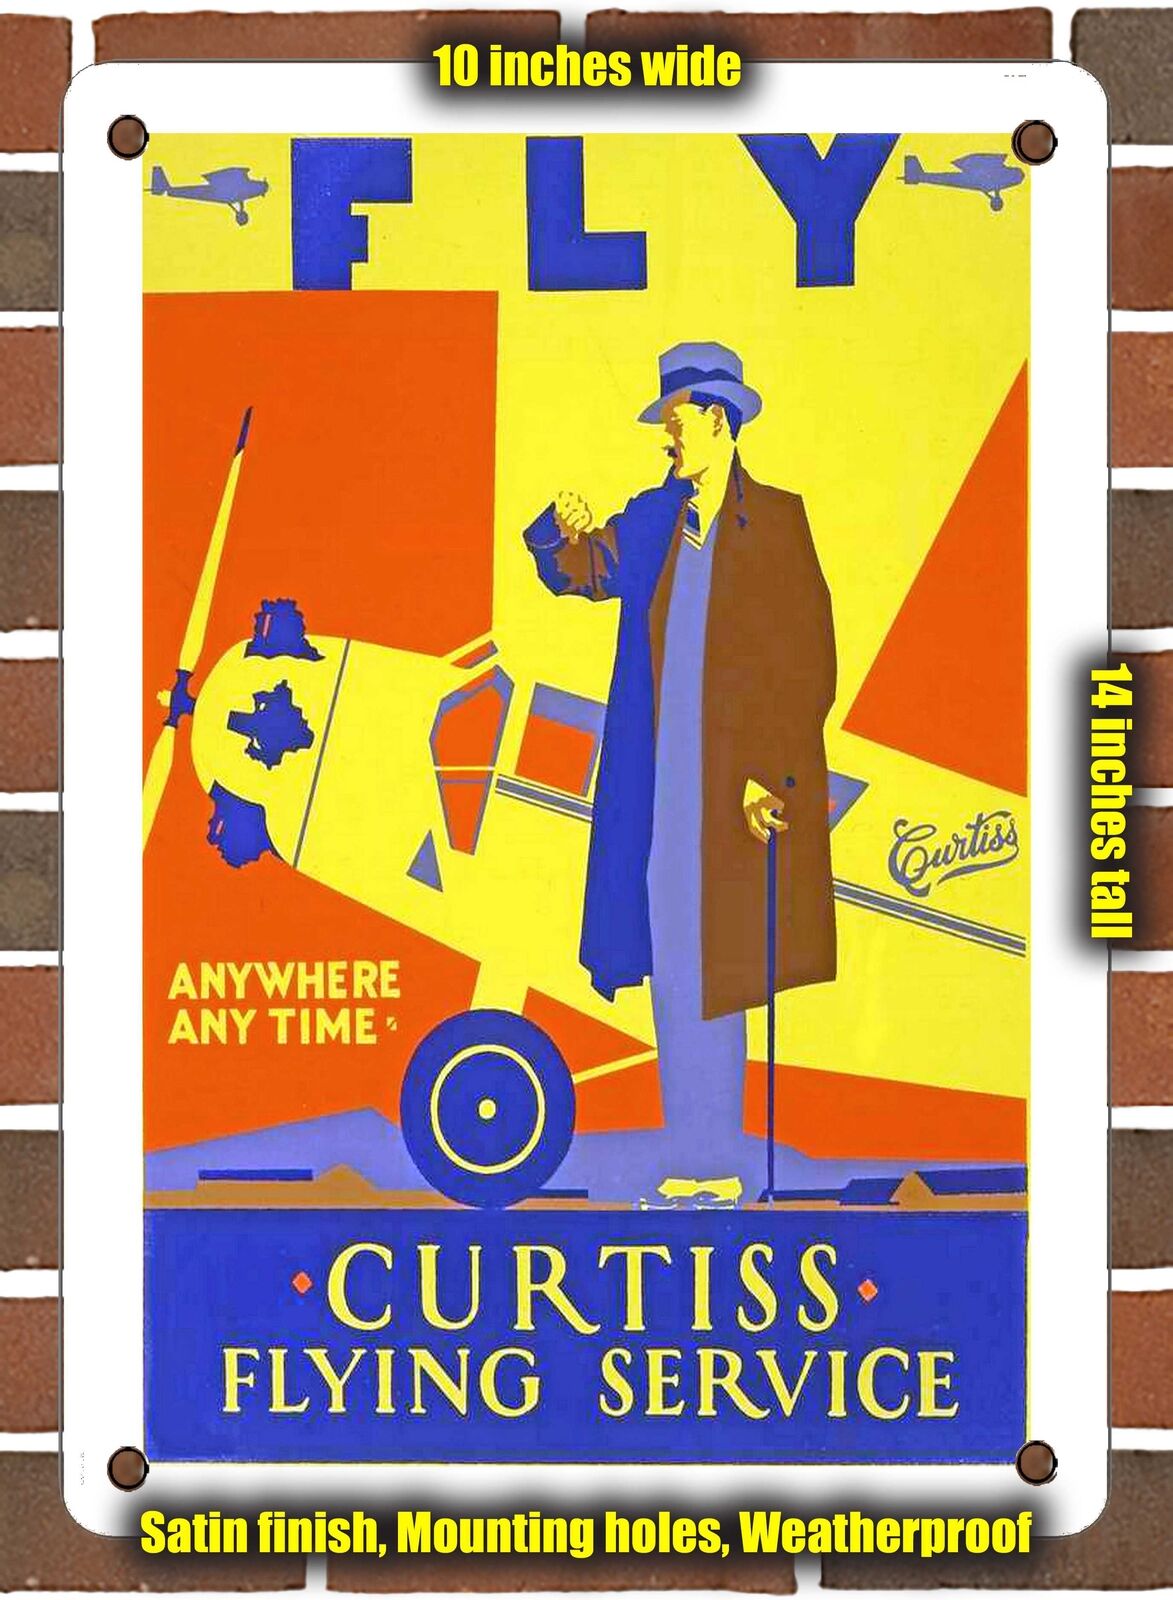 METAL SIGN - 1928 Fly Anywhere Any Time Curtiss Flying Service - 10x14 Inches